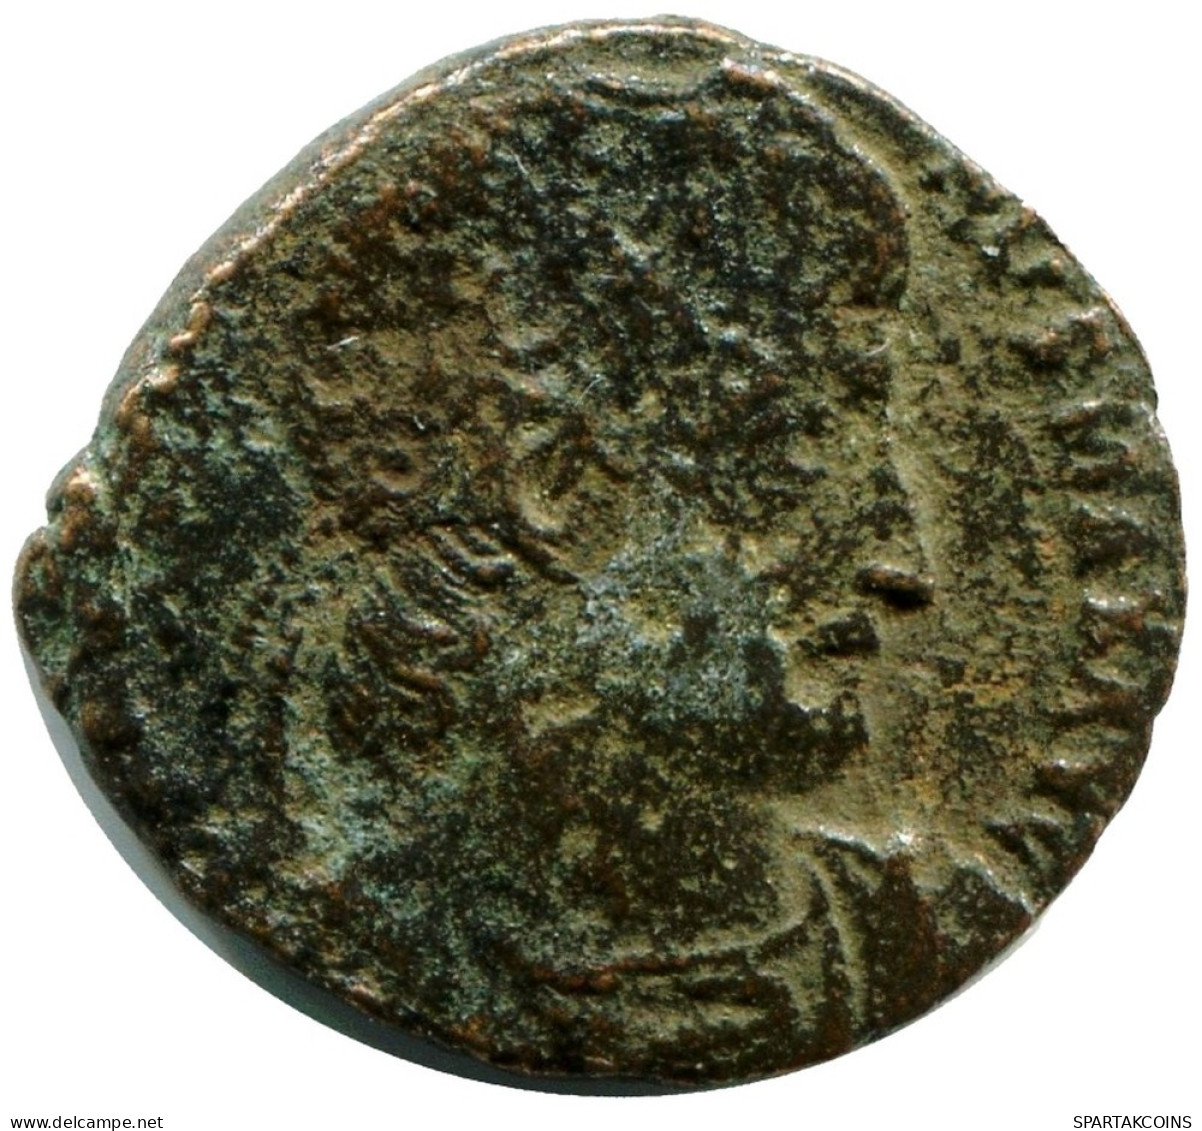 CONSTANTINE I MINTED IN ROME ITALY FROM THE ROYAL ONTARIO MUSEUM #ANC11184.14.D.A - Der Christlischen Kaiser (307 / 363)